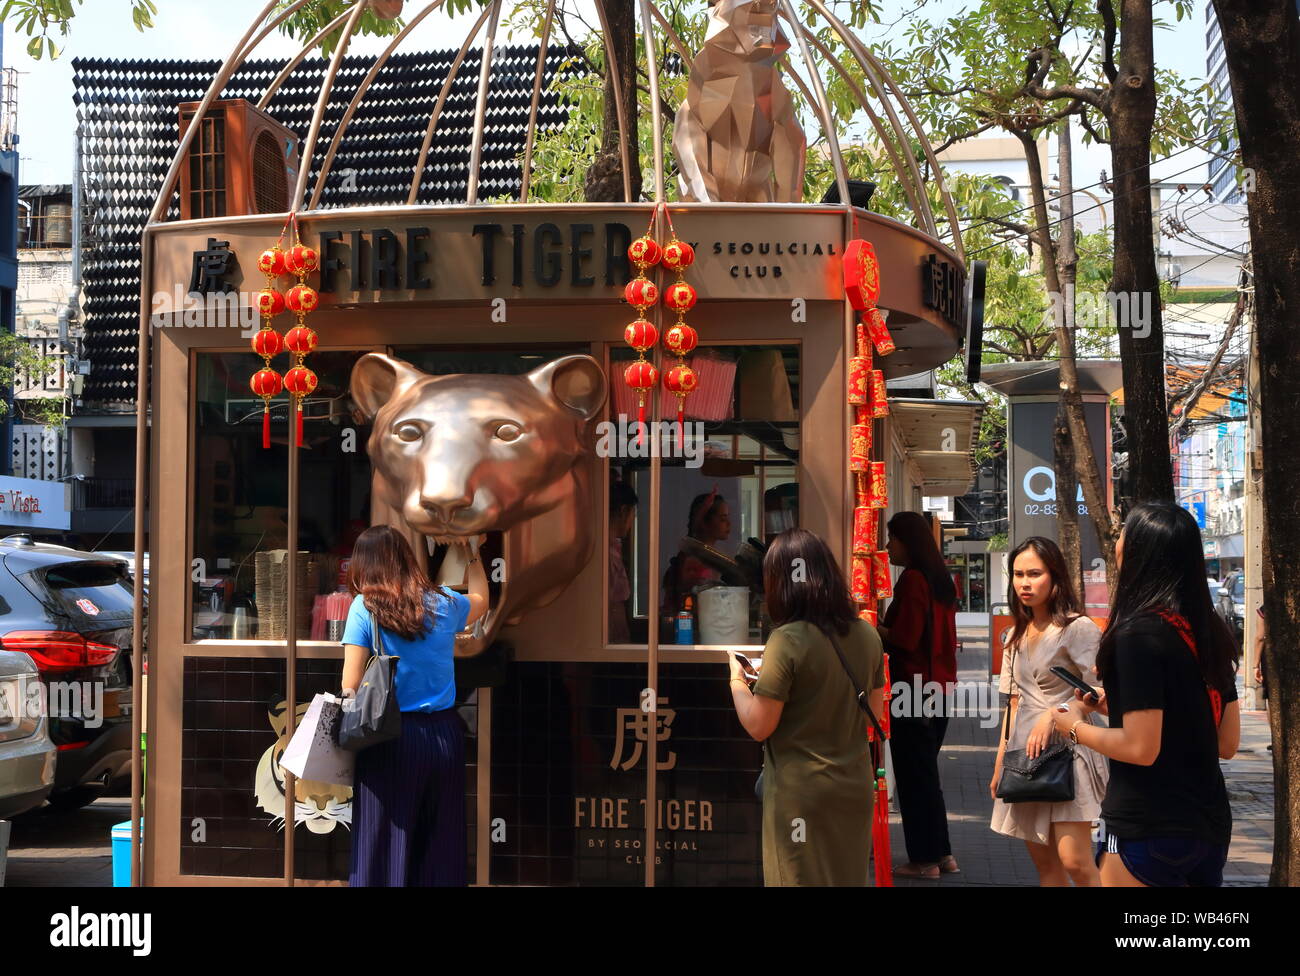 A lady is picking up her drink from tiger mouth of fire tiger, which is a refreshment stall in siam square shopping center, Bangkok, Thailand Stock Photo